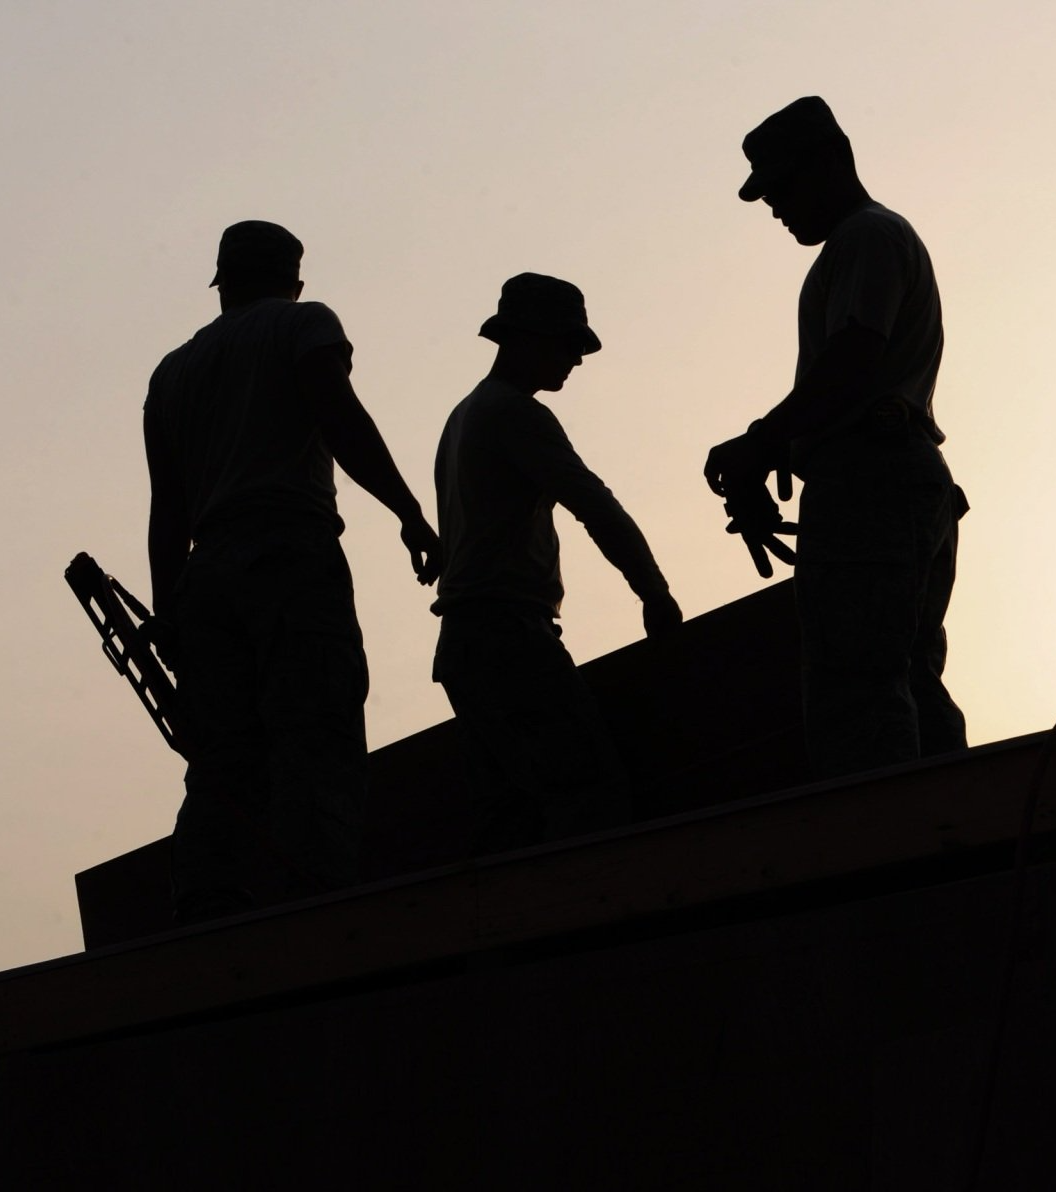 a silhouette of three men standing on top of a building doing roof work